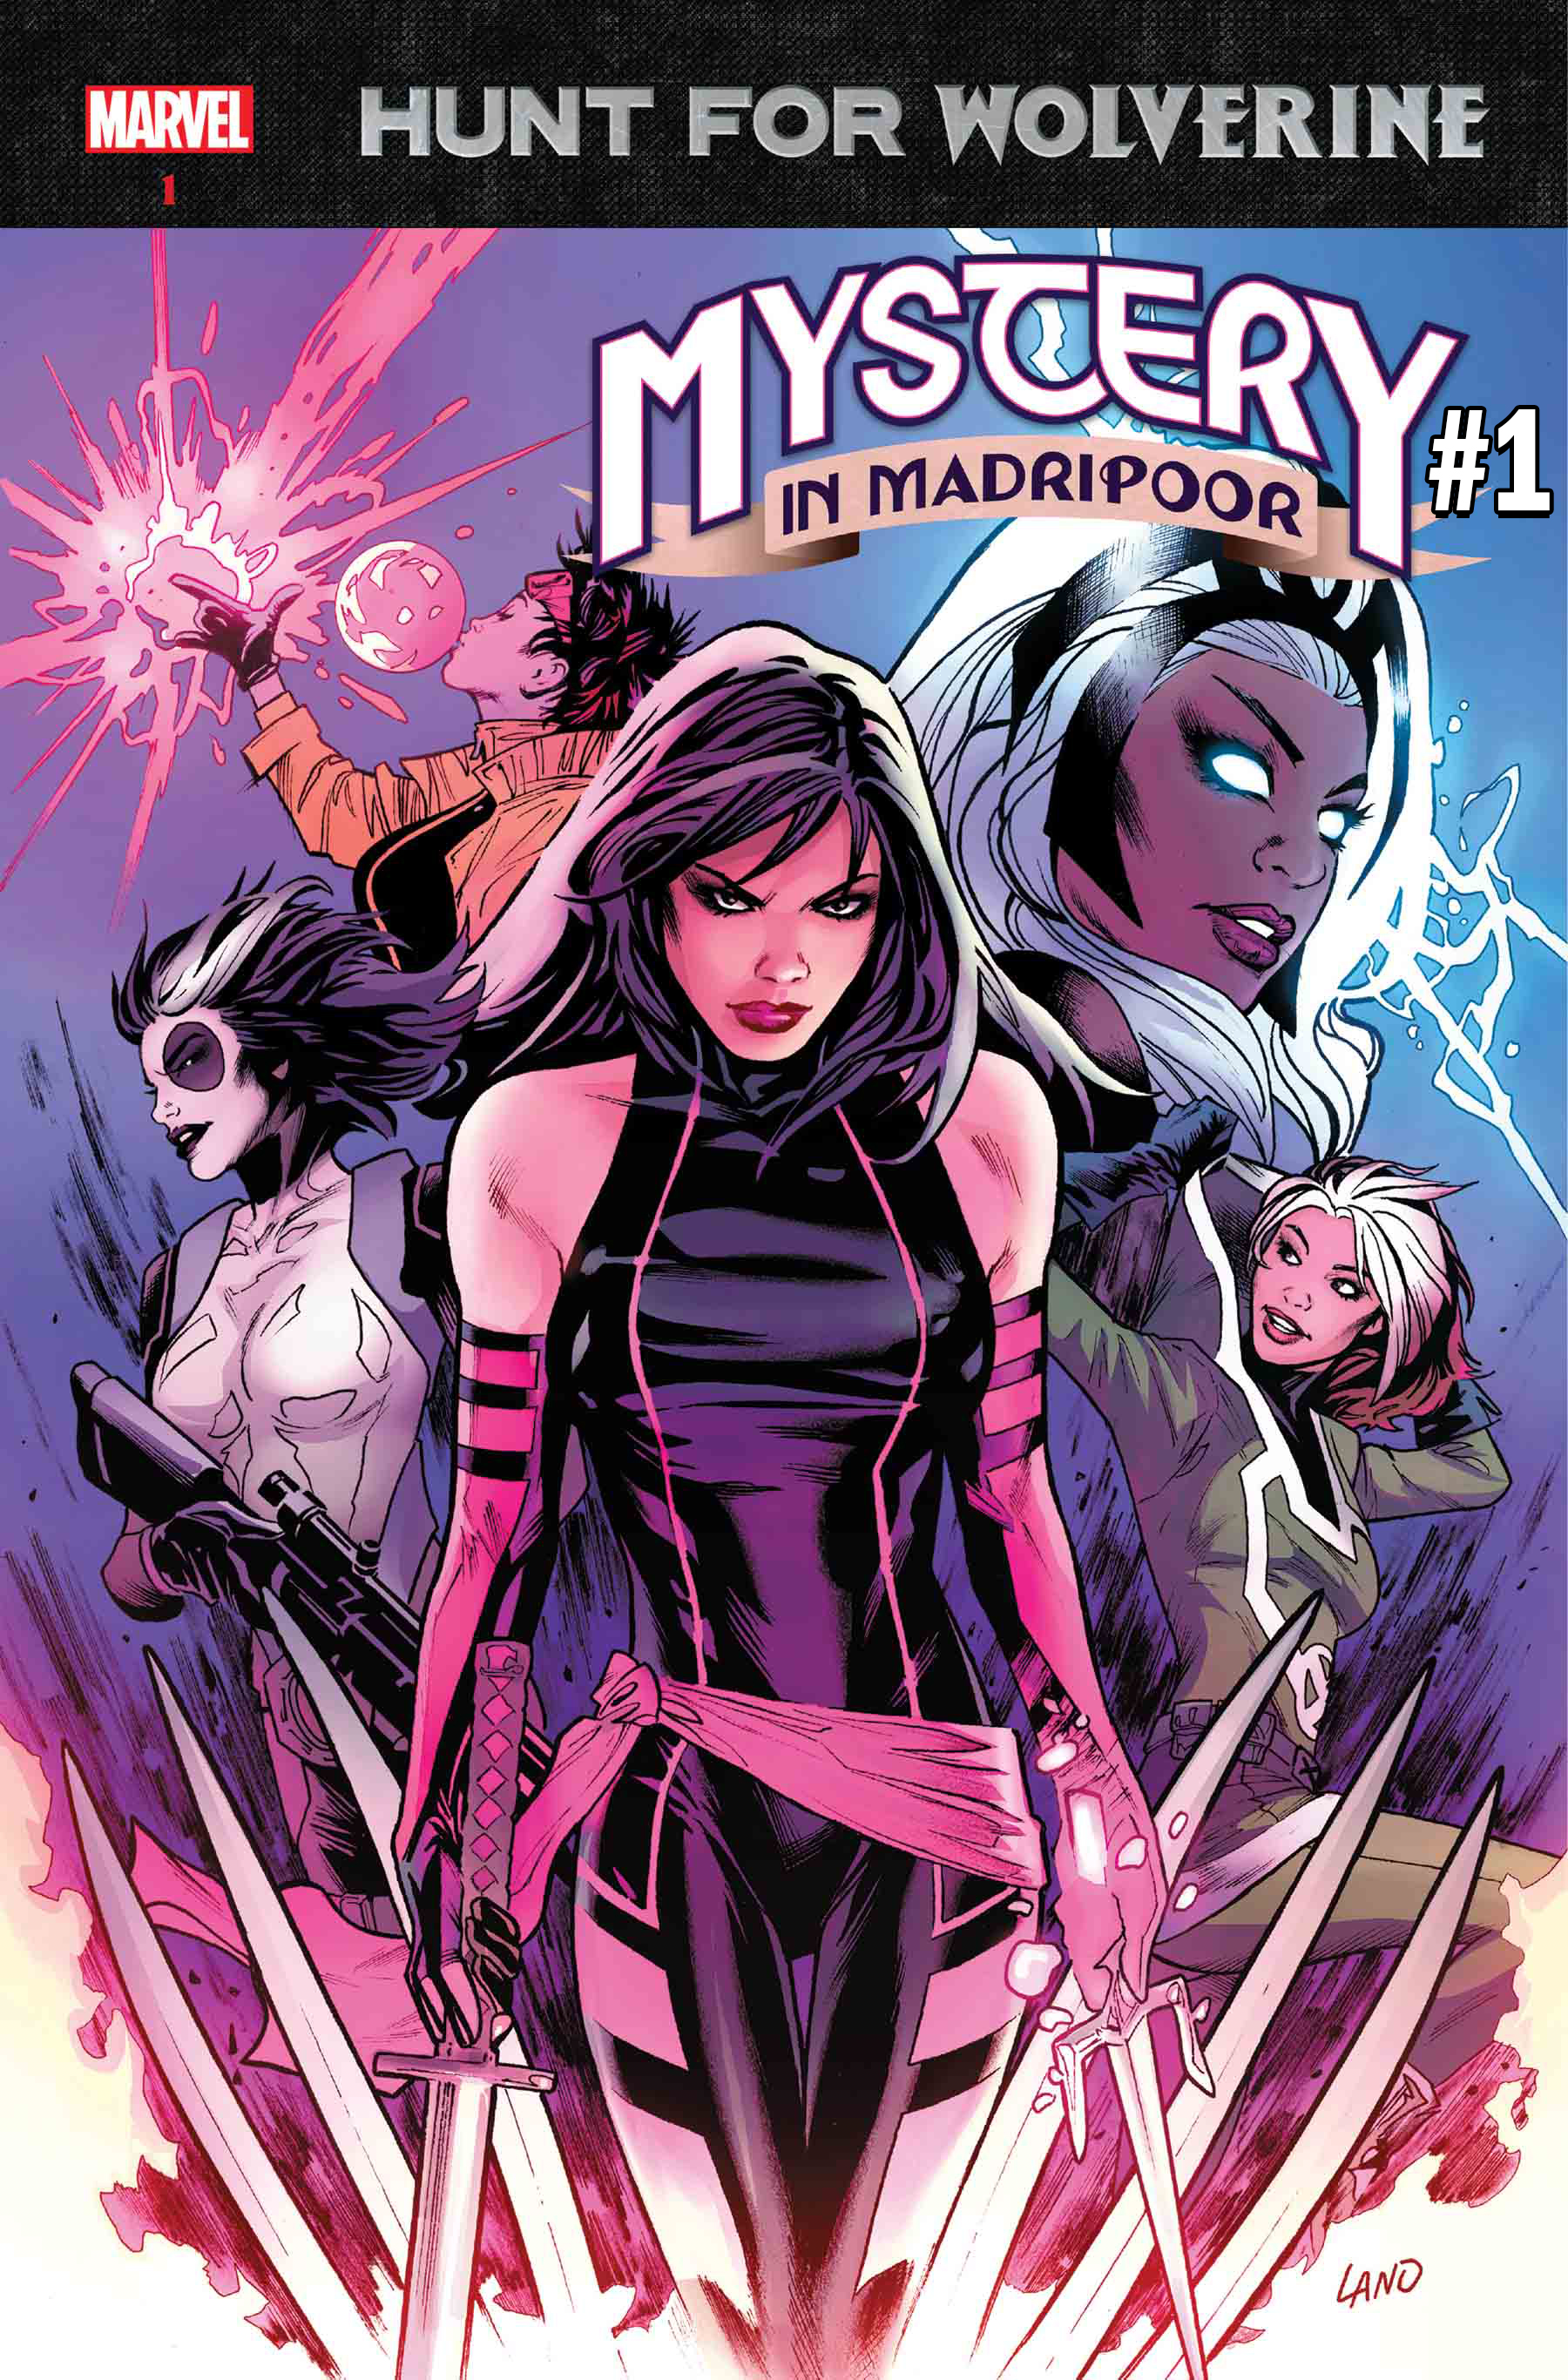 The Hunt for Wolverine Mystery in Madripoor #1